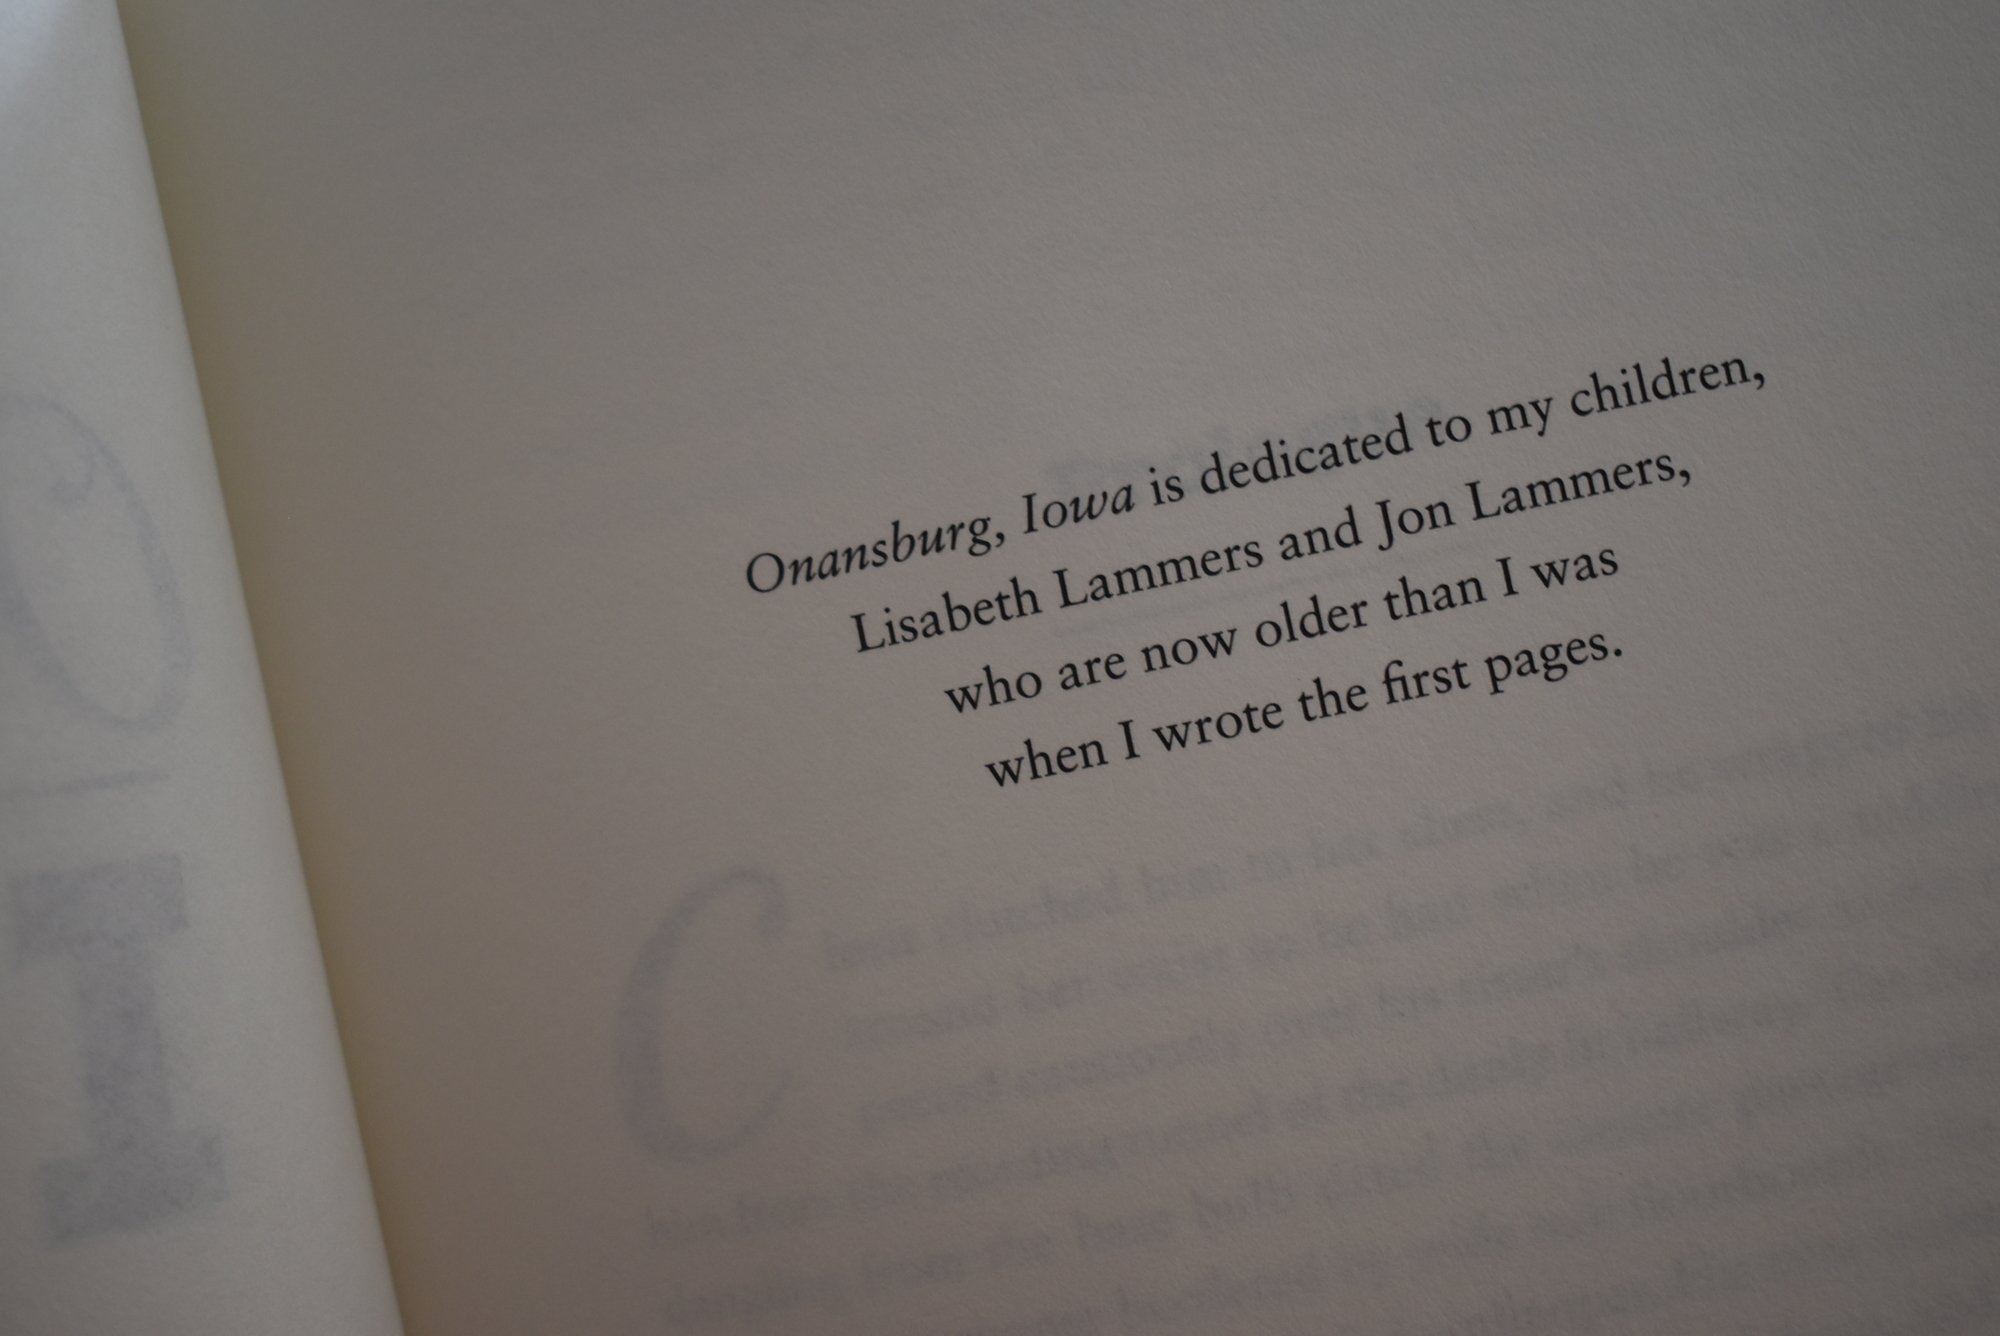 The novel is dedicated to Lammers' children.